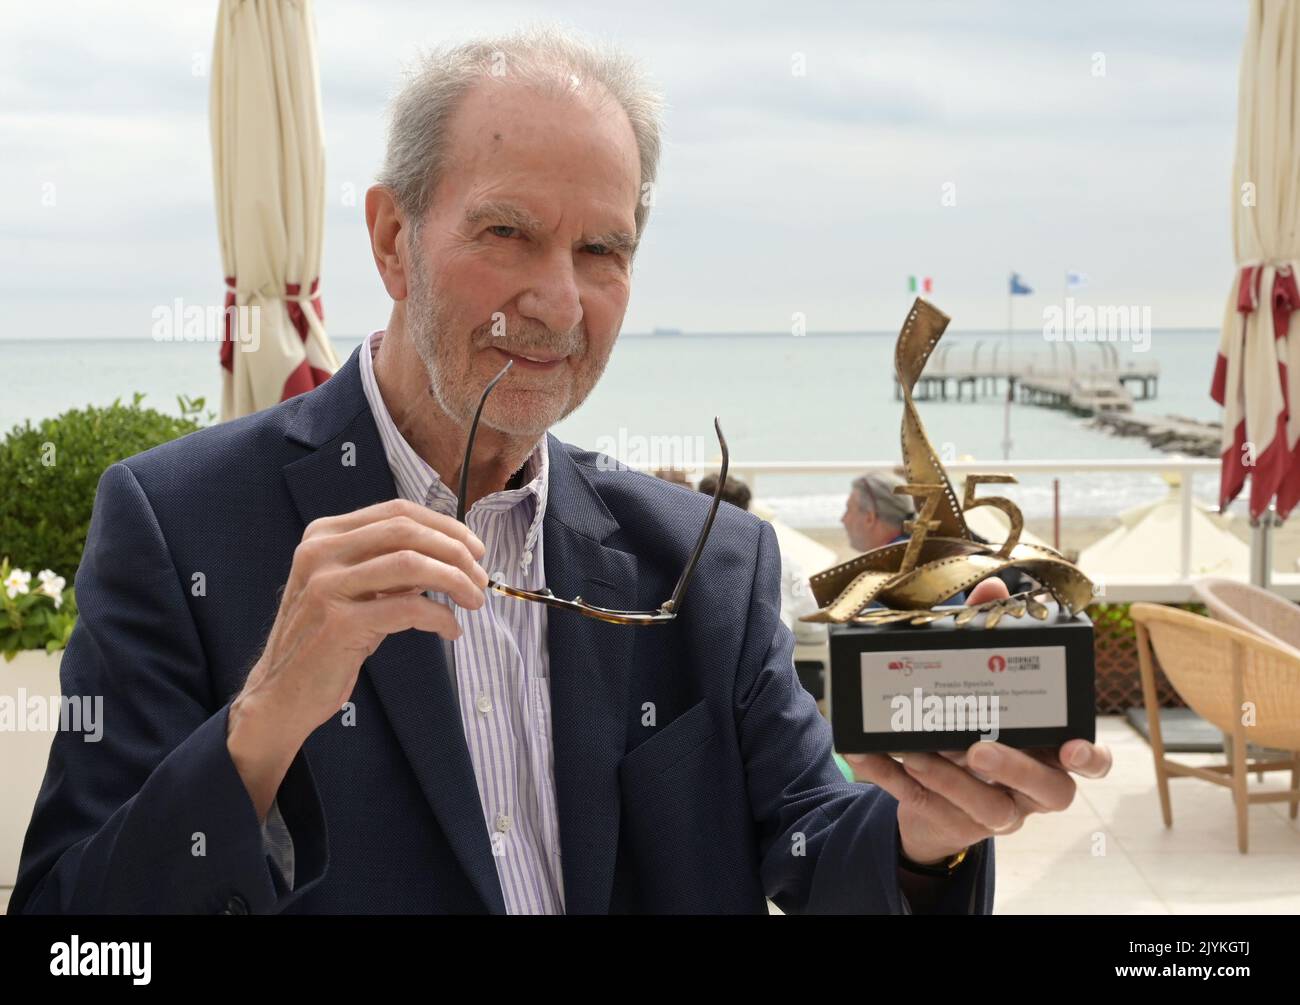 08 September 2022, Italy, Venedig: German director Edgar Reitz, known for his "Heimat" series of films, stands on the terrace of the Hotel Excelsior showing his special lifetime achievement award received from the 75° Fondazione Ente del Spettacolo and Giornate degli Autori during the 79th Venice International Film Festival. (to dpa: "Director Edgar Reitz: Home is no longer a fixed place") Photo: Stefanie Rex/dpa Stock Photo